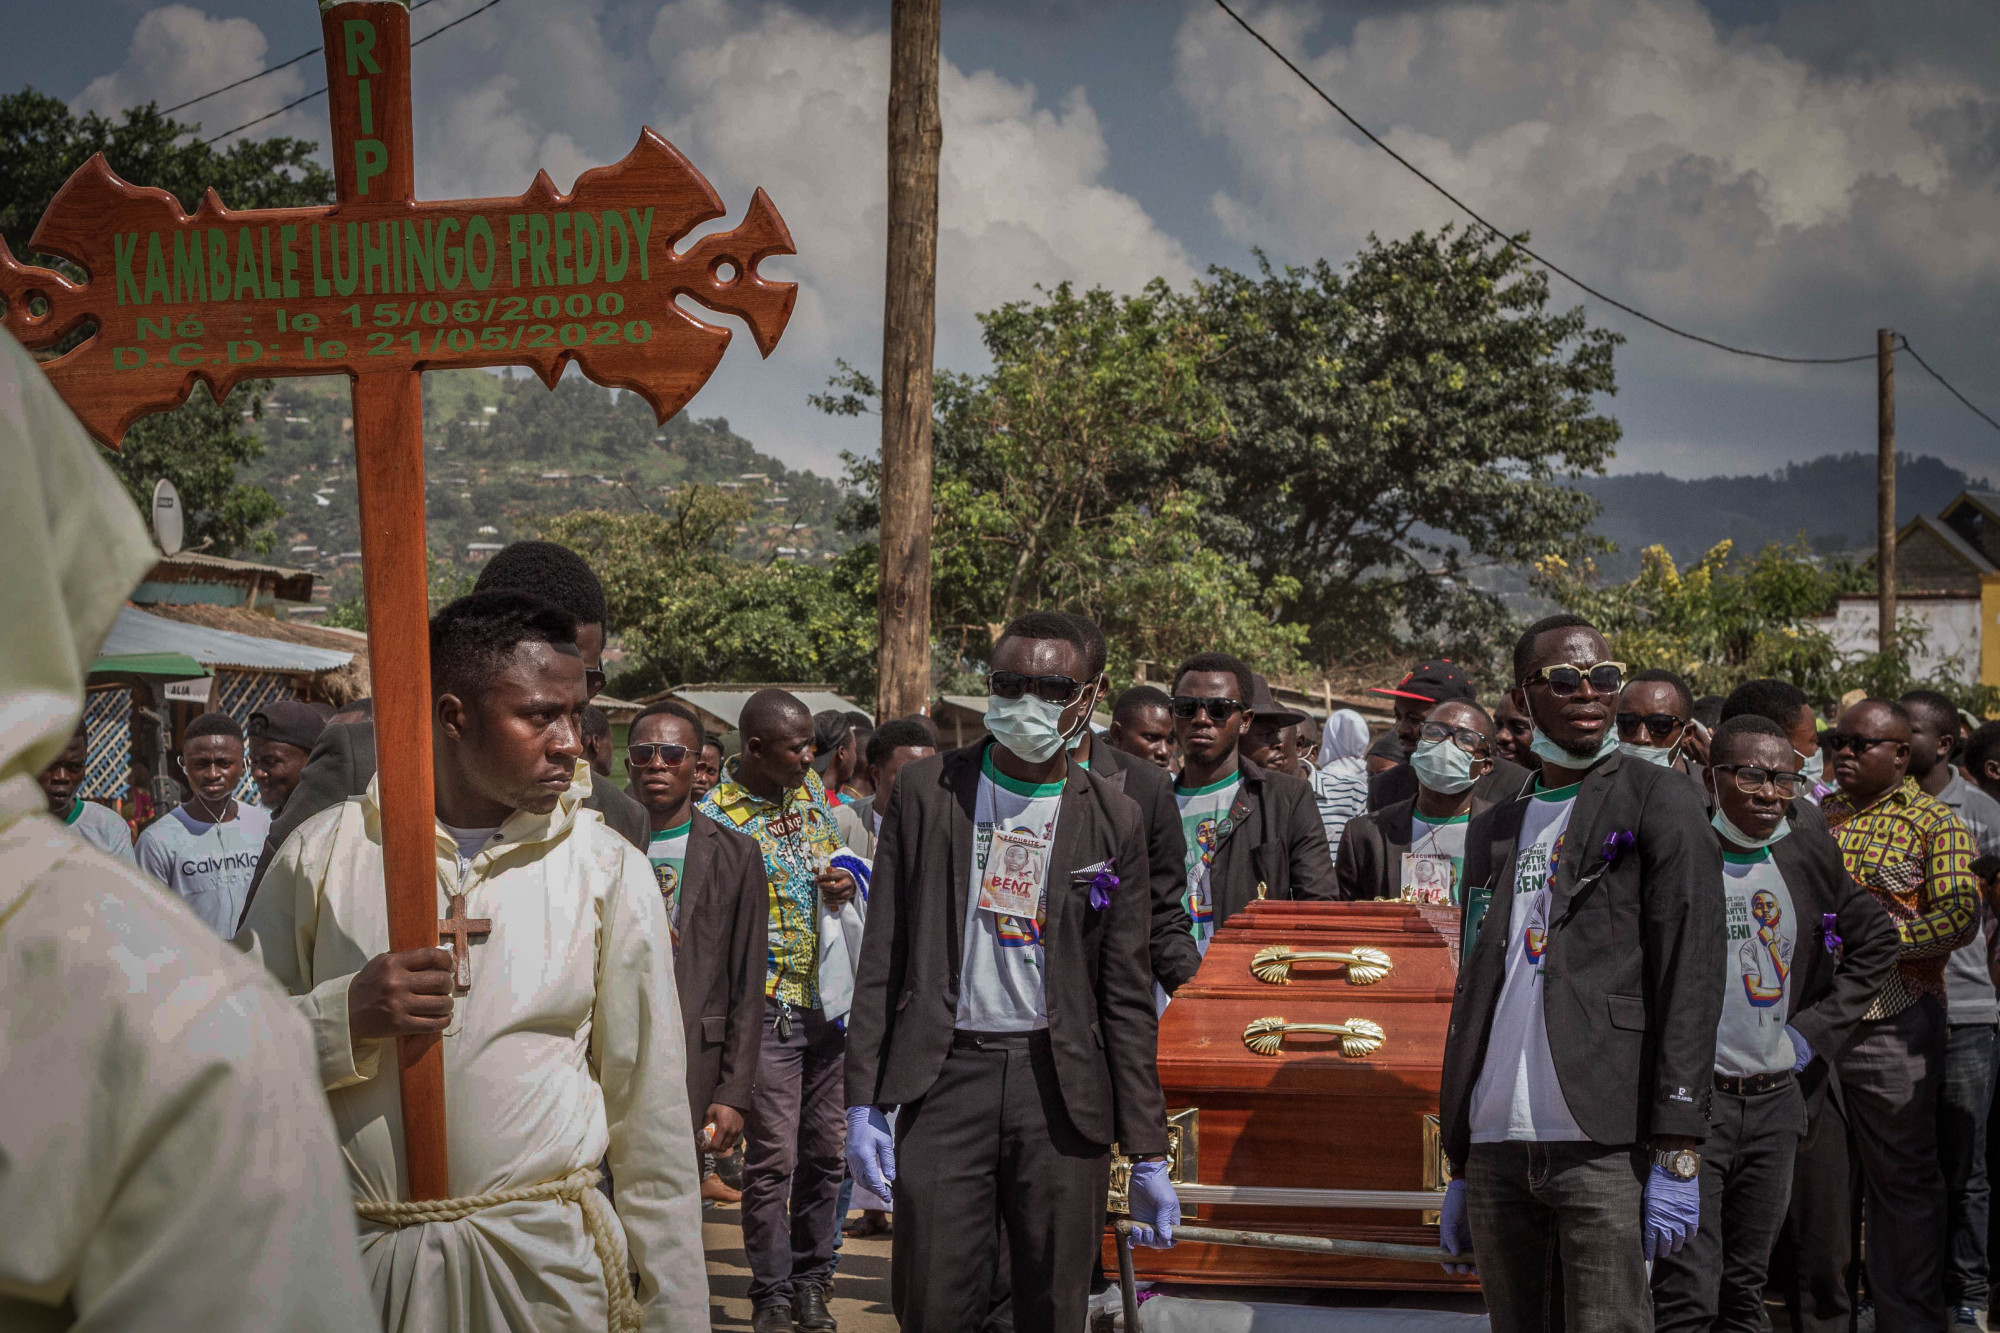 Beni, Democratic Republic of Congo, May 2020. Pall bearers carry the coffin of Freddy Kambale, an activist with the non-violent youth civil society movement Lutte pour le changement (LUCHA), who was shot and killed by police during a protest against insecurity in Beni last month. Police violence in Congo is common, according to Human Rights Watch. The trial of the officer accused of the shooting begins today. © Danny Matsongani for Fondation Carmignac